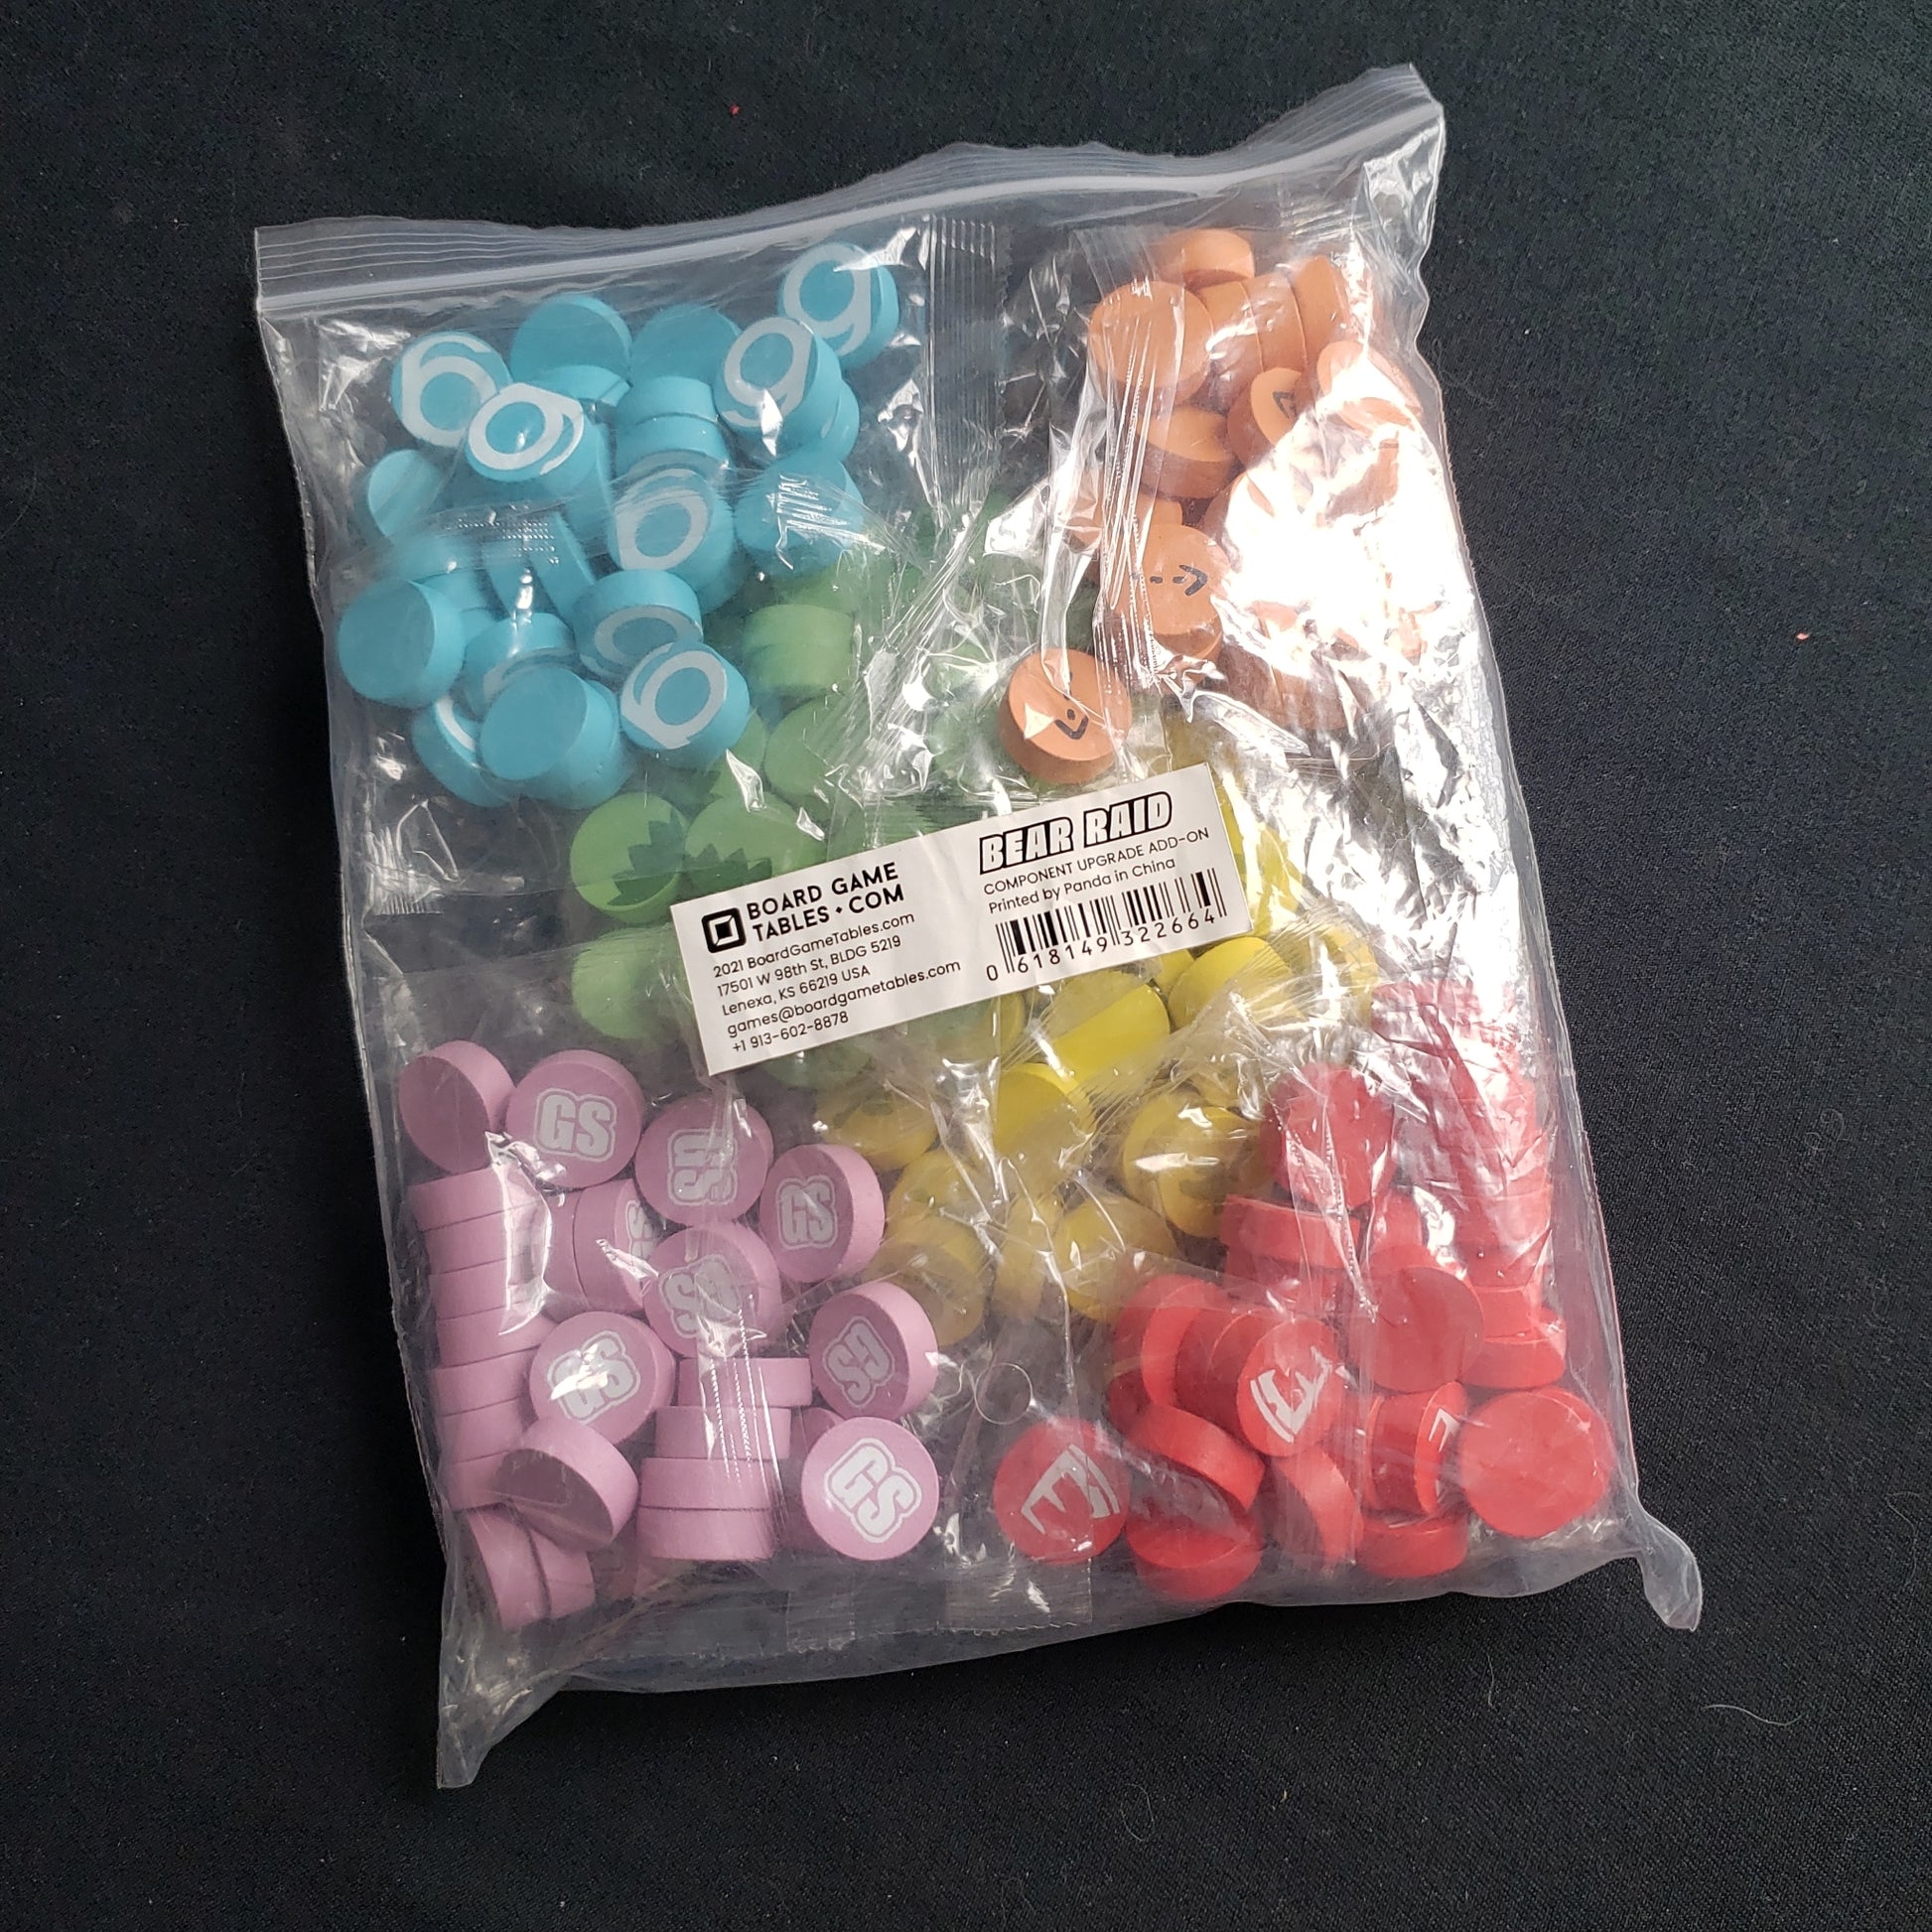 Image shows a bag of wooden upgrade discs in six colors for the Bear Raid board game